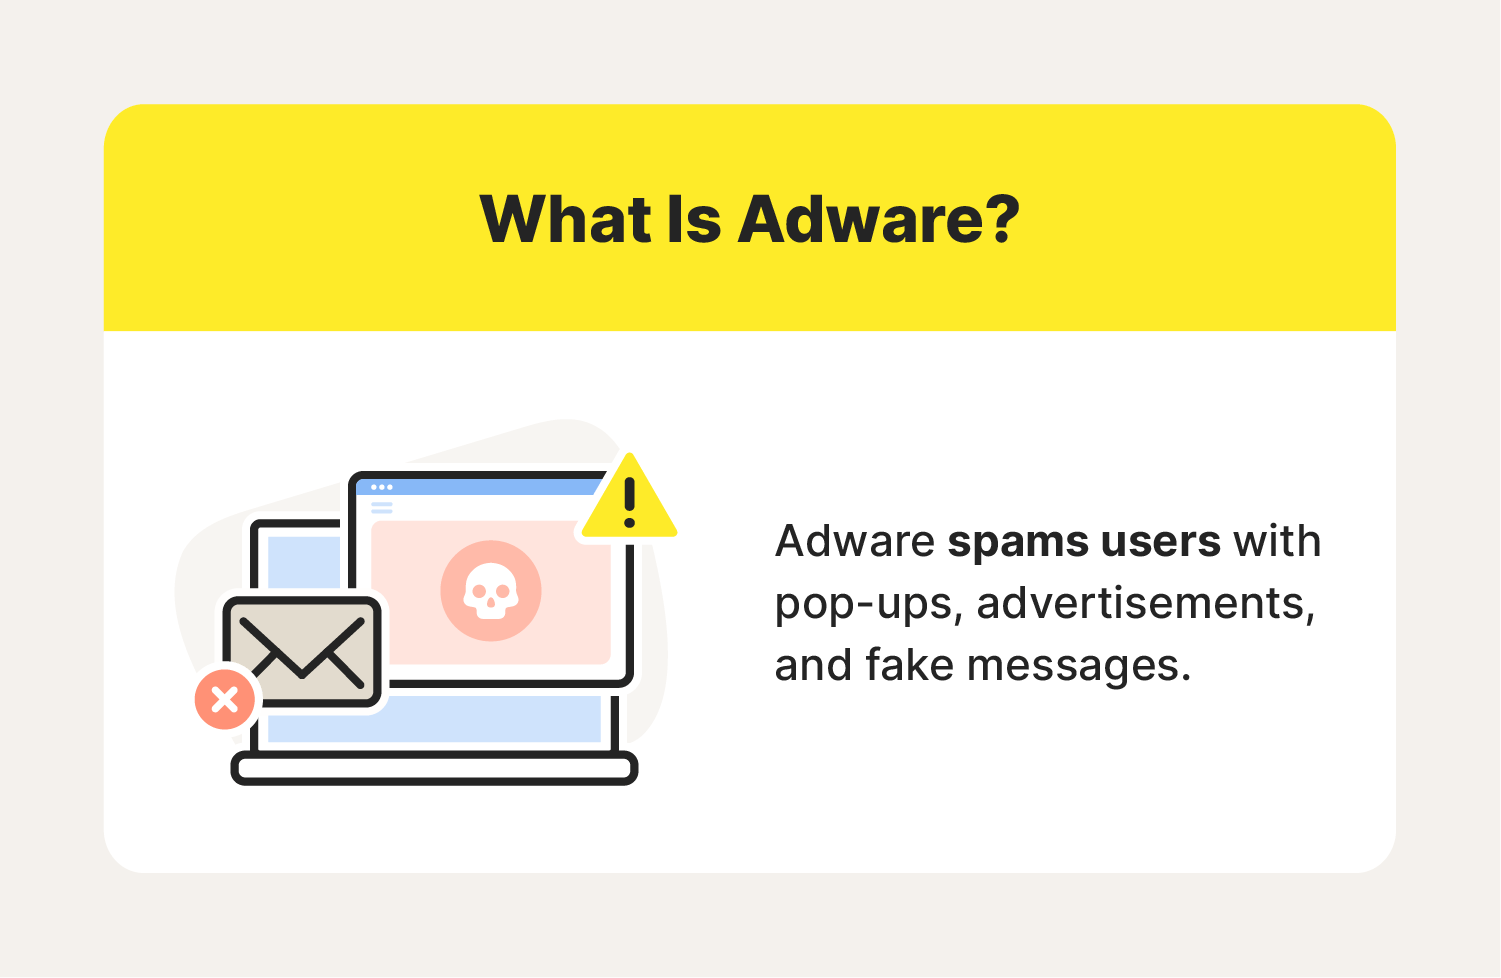 A design briefly explains what adware is.